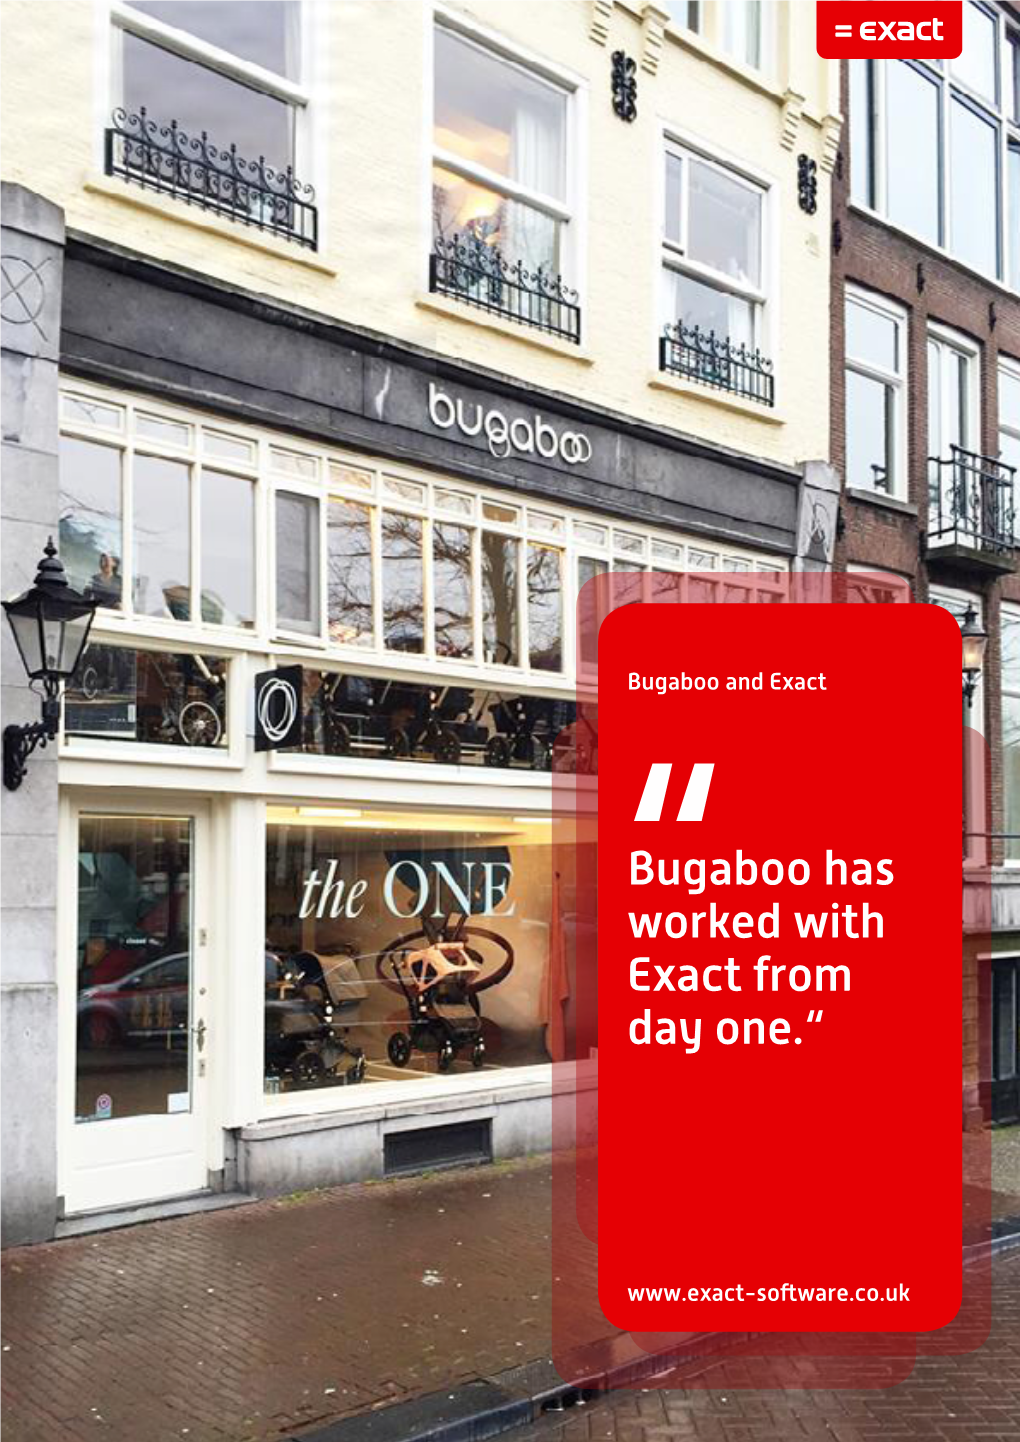 Bugaboo Has Worked with Exact from Day One.“